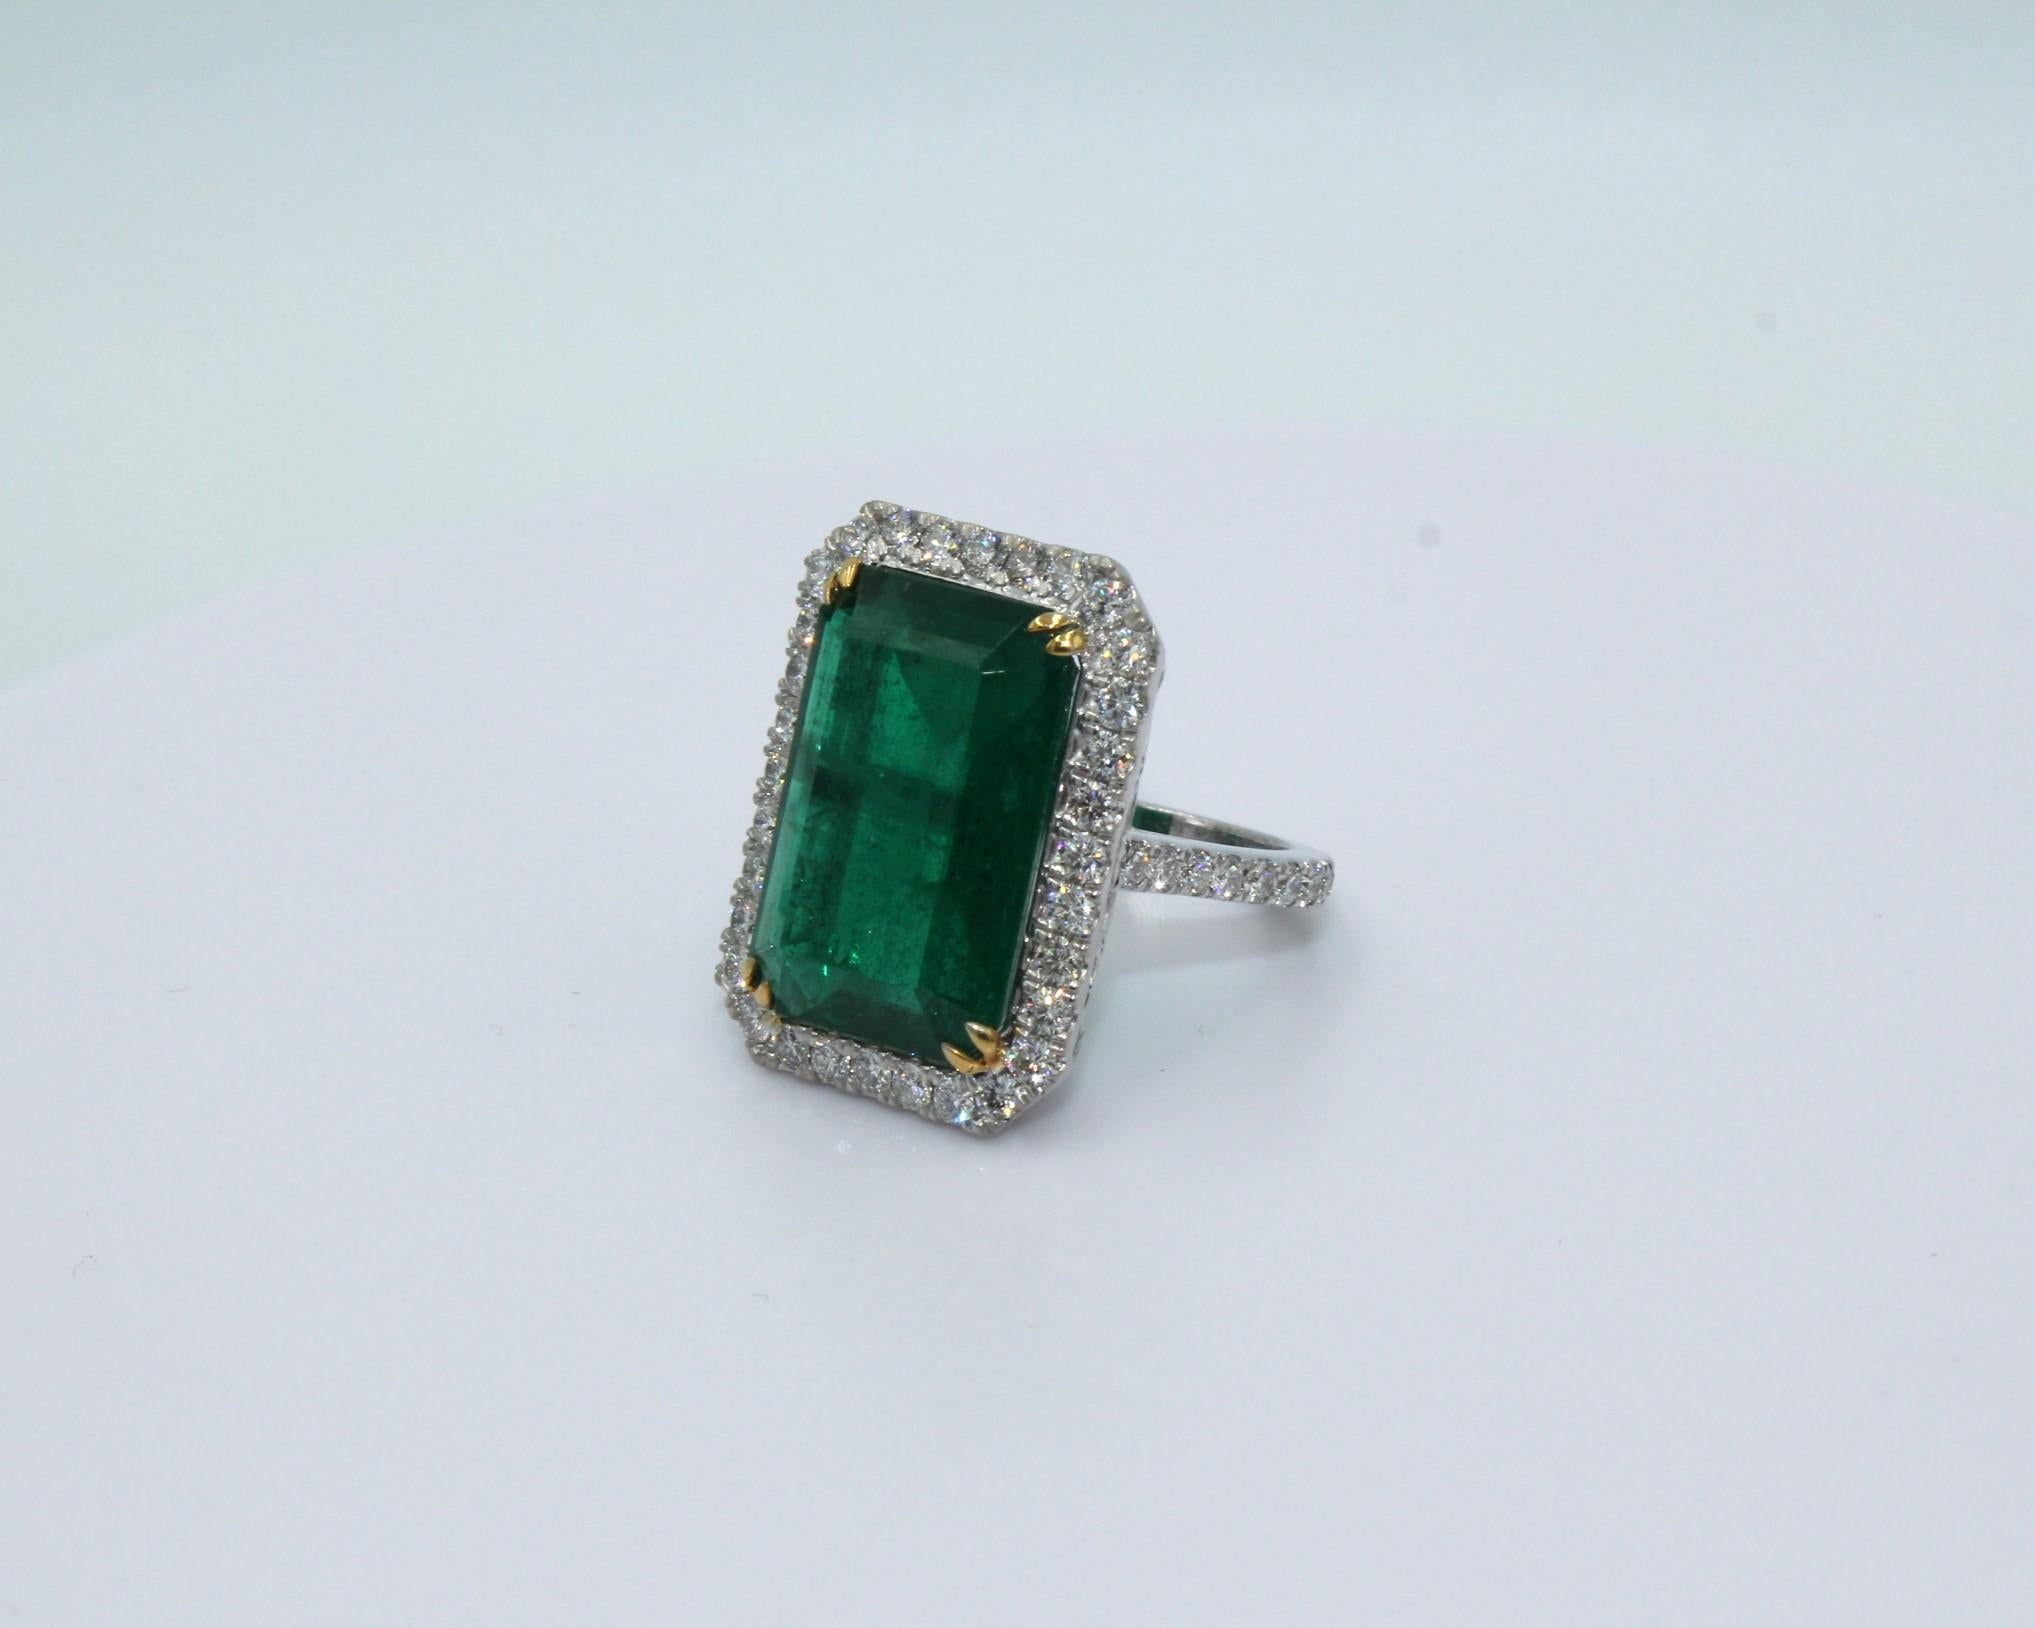 9.34 carats cushion shaped Zambian Emerald surrounded with 18 round shaped diamonds, totaling diamond weight of 1.57 carat. 

This gorgeous Emerald & Diamond Ring will highlight your elegance and uniqueness. 

Item Details:
- Type: Ring
- Metal: 18K